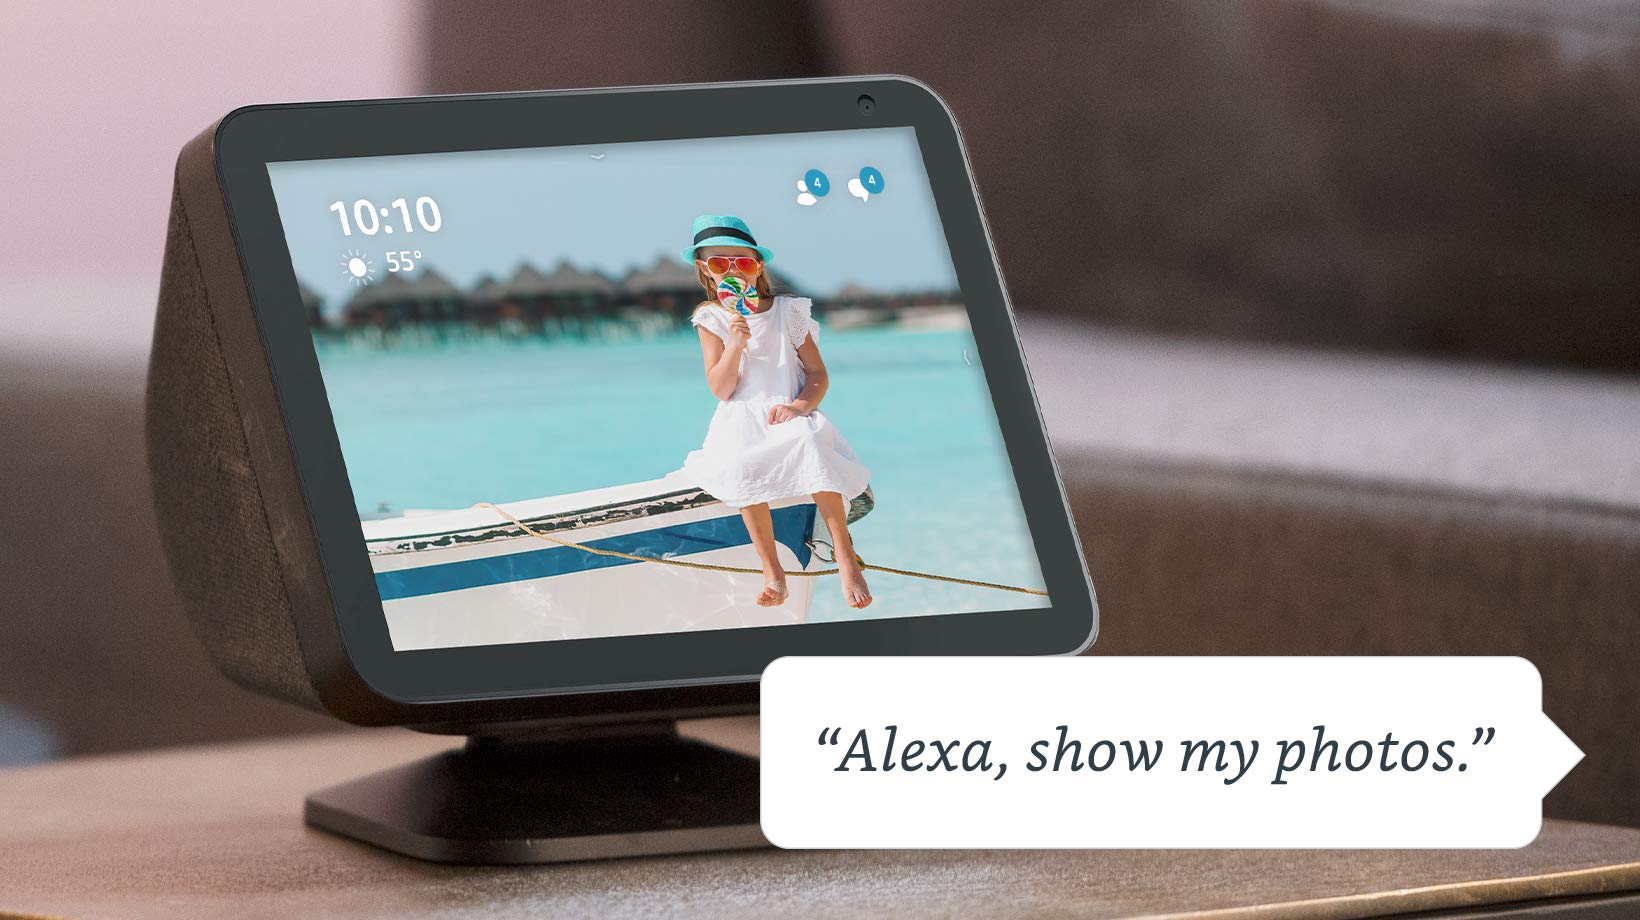 How To Transfer Photos From IPhone To Echo Show Using Alexa